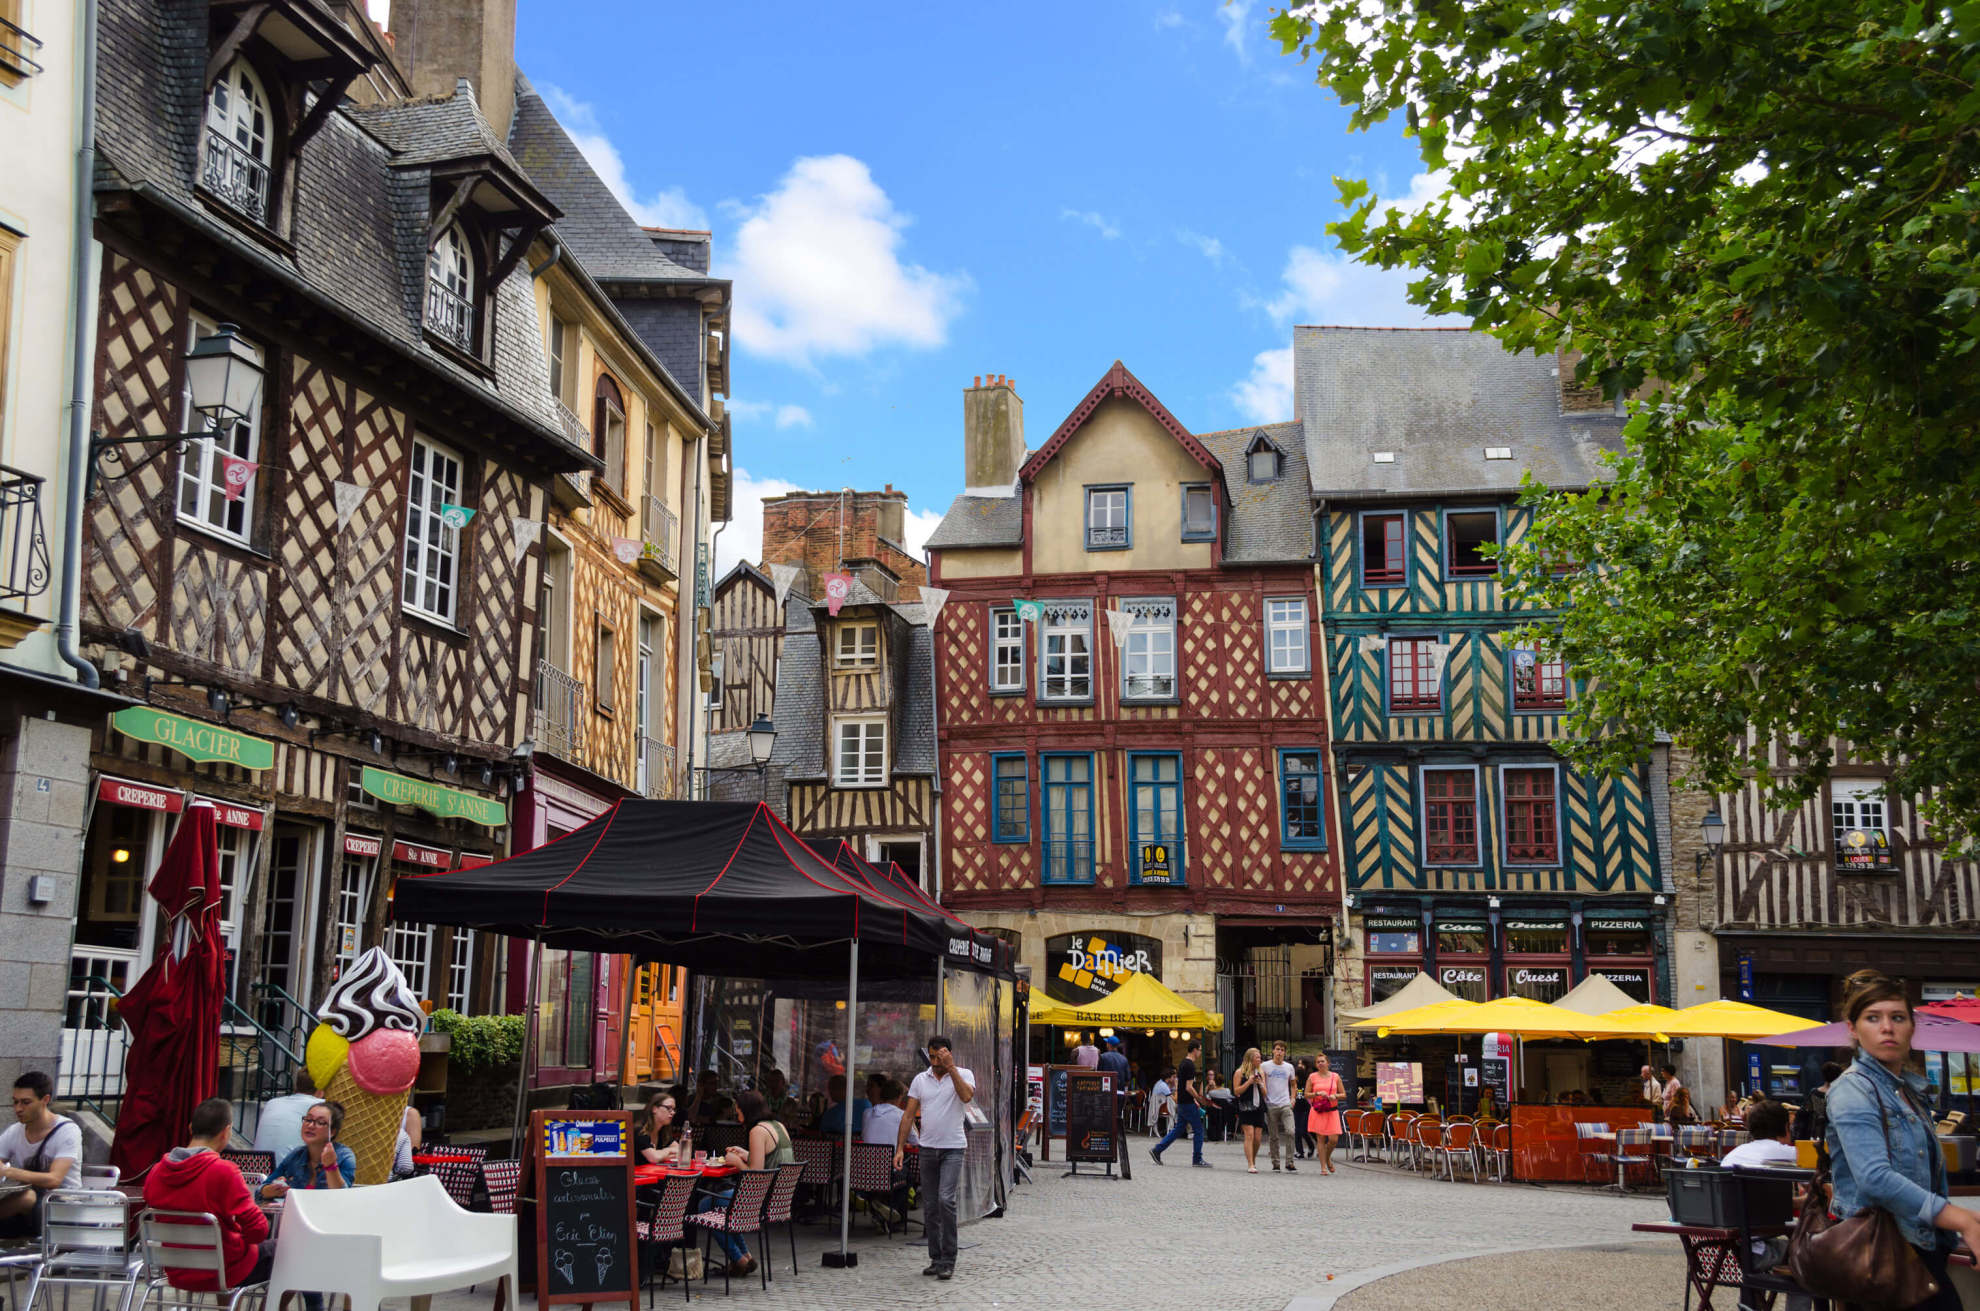 The medieval half-timber houses of Rennes © Shutterstock